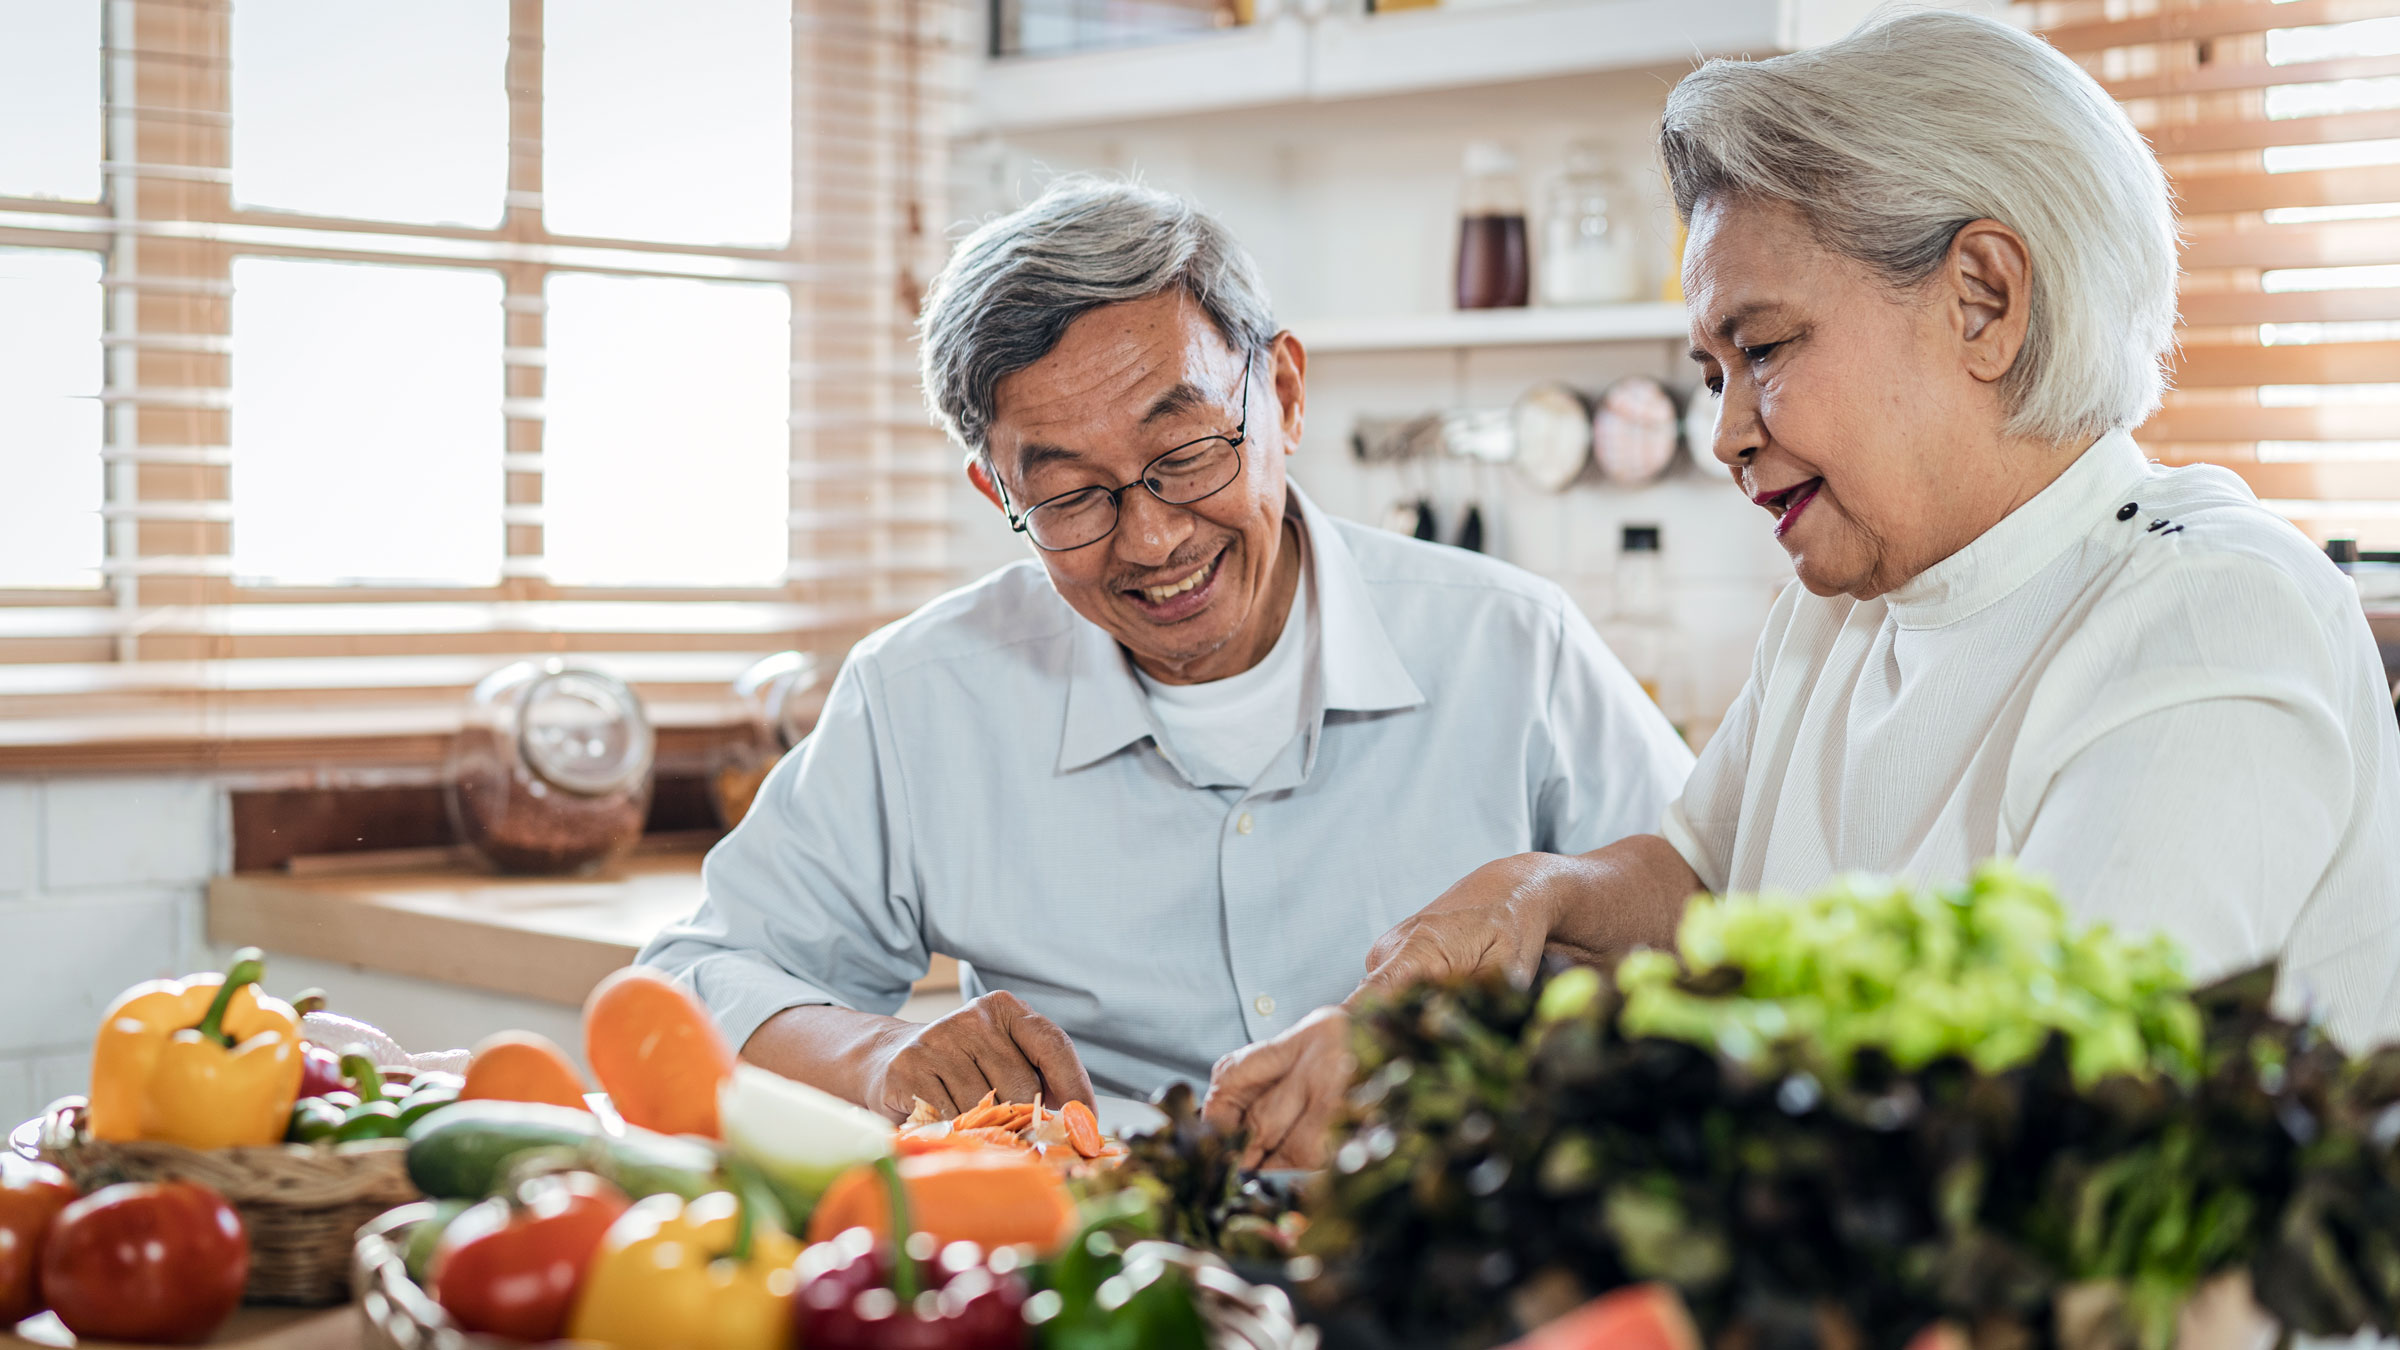 Insurance: Early retirement: senior couple prepping food 1190205448